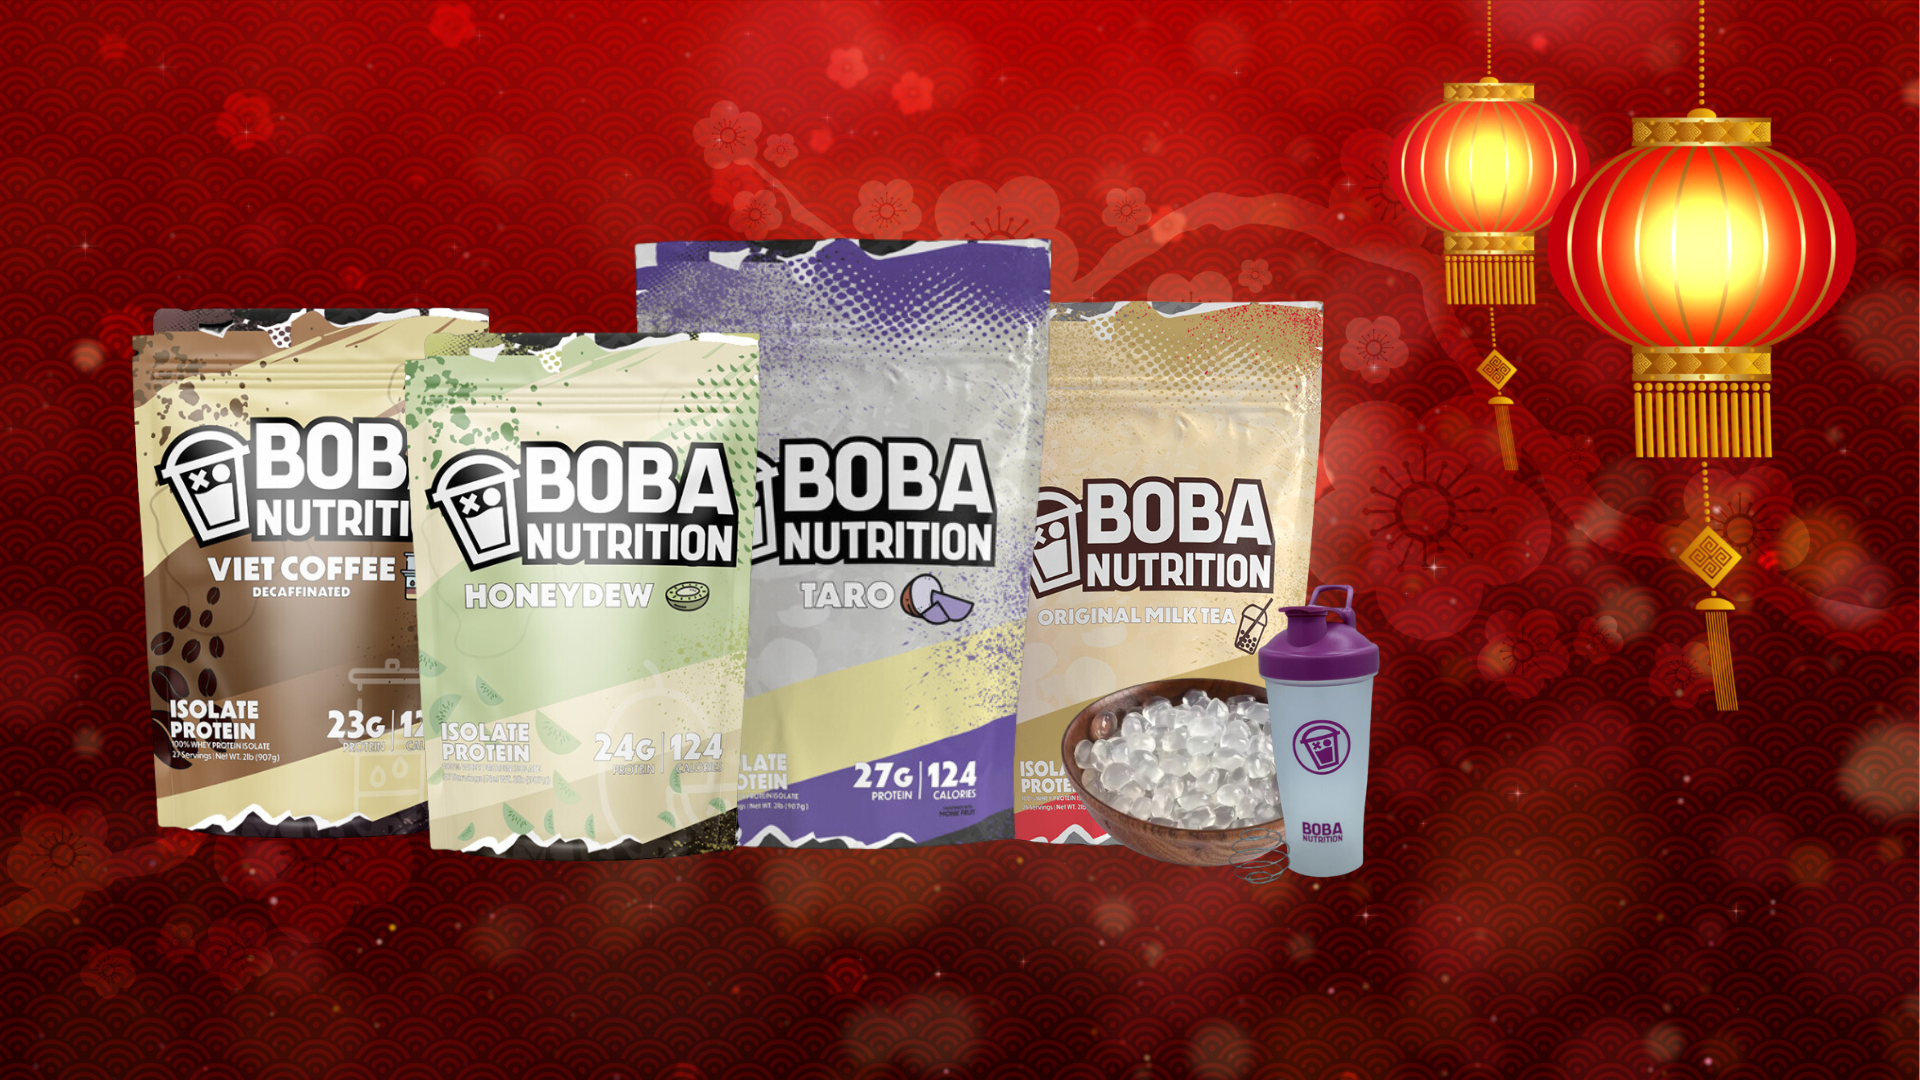 Boba Nutrition's Lunar New Year: Tradition & Nutrition